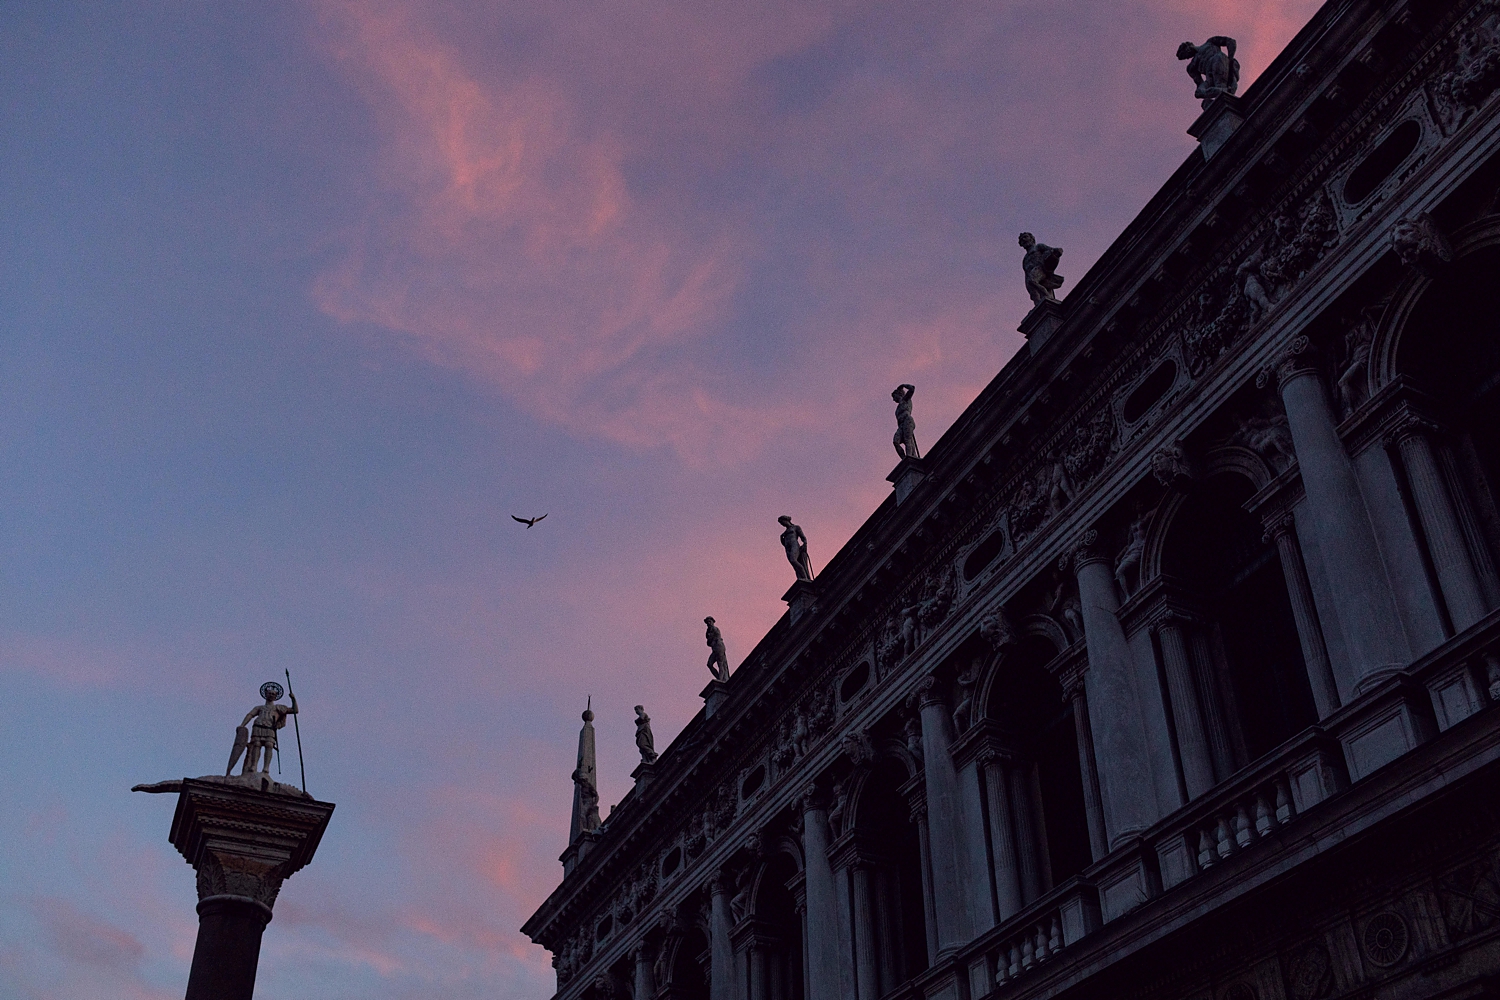 Top of Doge's Palace in Palazzo Ducale Venice, Italy at sunset with purple sky